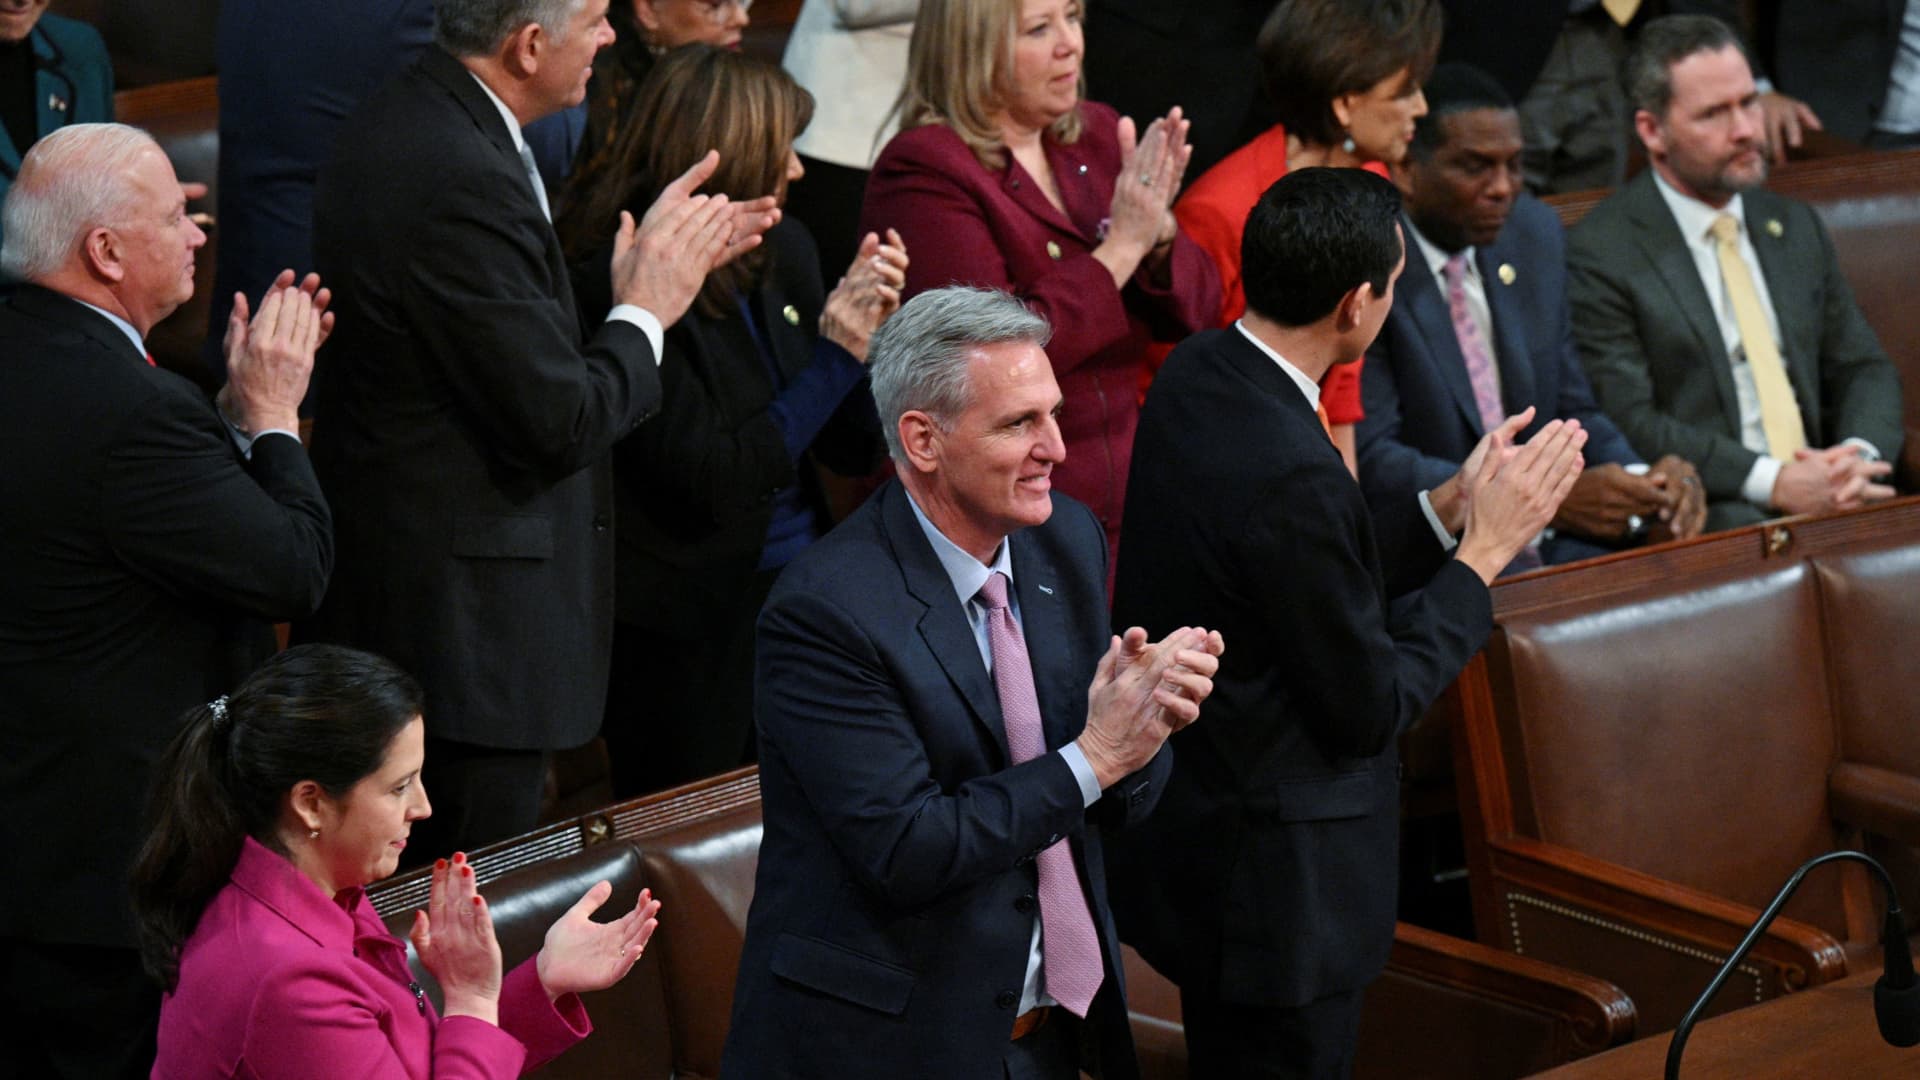 U.S. House Republican Leader Kevin McCarthy (R-CA) applauds with Republican Conference Chair Elise Stefanik (R-NY) and other supporters as another conservative member's vote flips to voting for McCarthy in the 12th round of voting for a new Speaker on the 4th day of the 118th Congress at the U.S. Capitol in Washington, U.S., January 6, 2023. 